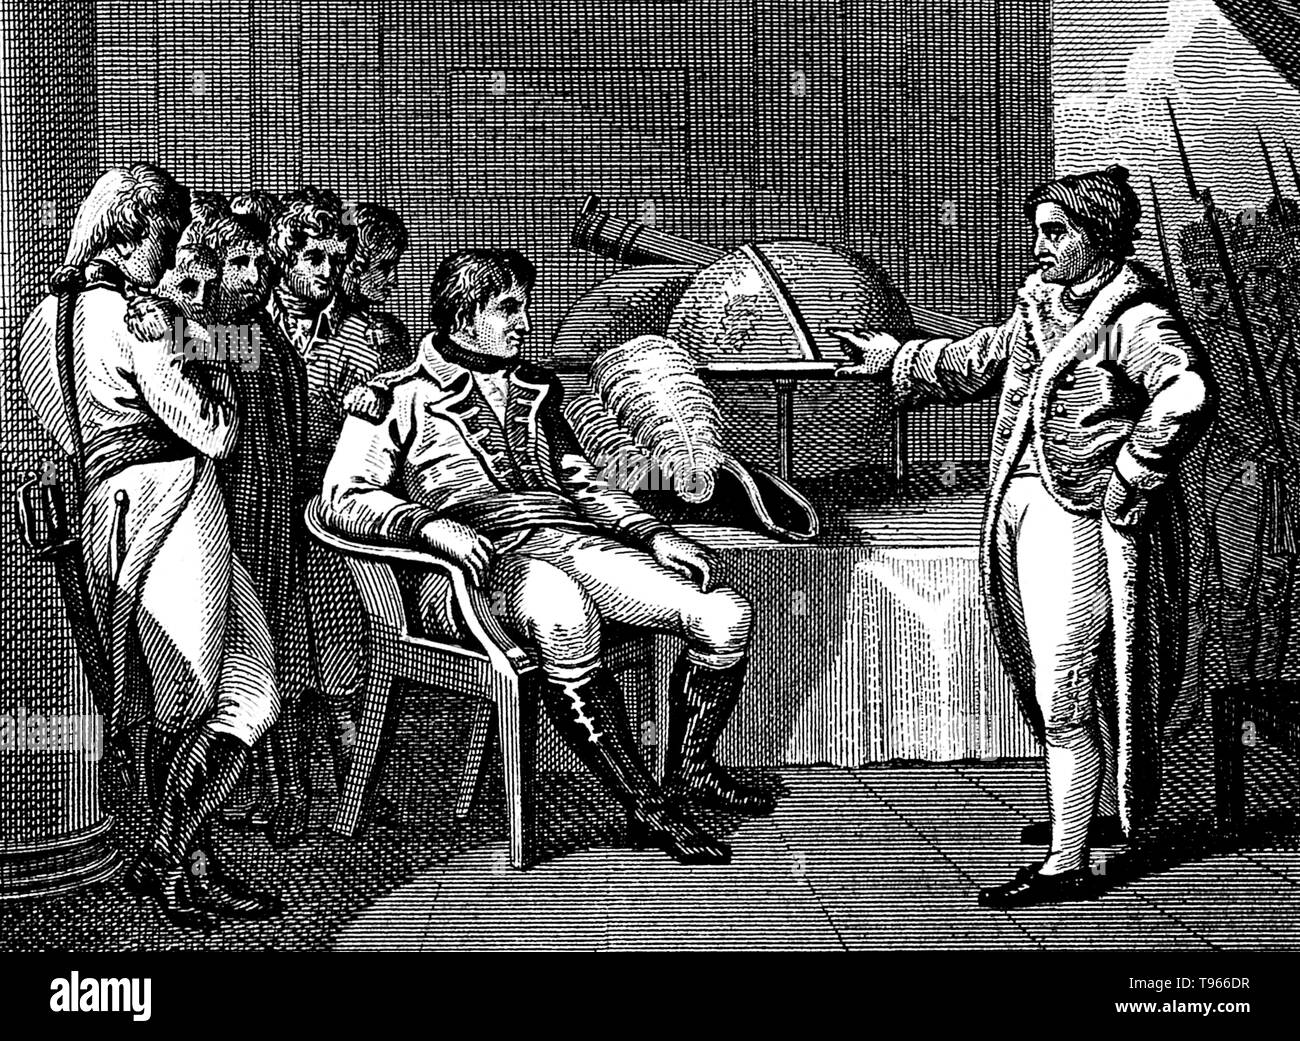 Napoleon listening to an astronomer in Milan. The Kingdom of Italy (1805-1814) was a French client state founded in Northern Italy by Napoleon I, fully influenced by revolutionary France, that ended with his defeat and fall.  Napoleon Bonaparte (August 15, 1769 - May 5, 1821) was a French military and political leader during the latter stages of the French Revolution. As Napoleon I, he was Emperor of the French from 1804 to 1815. Stock Photo